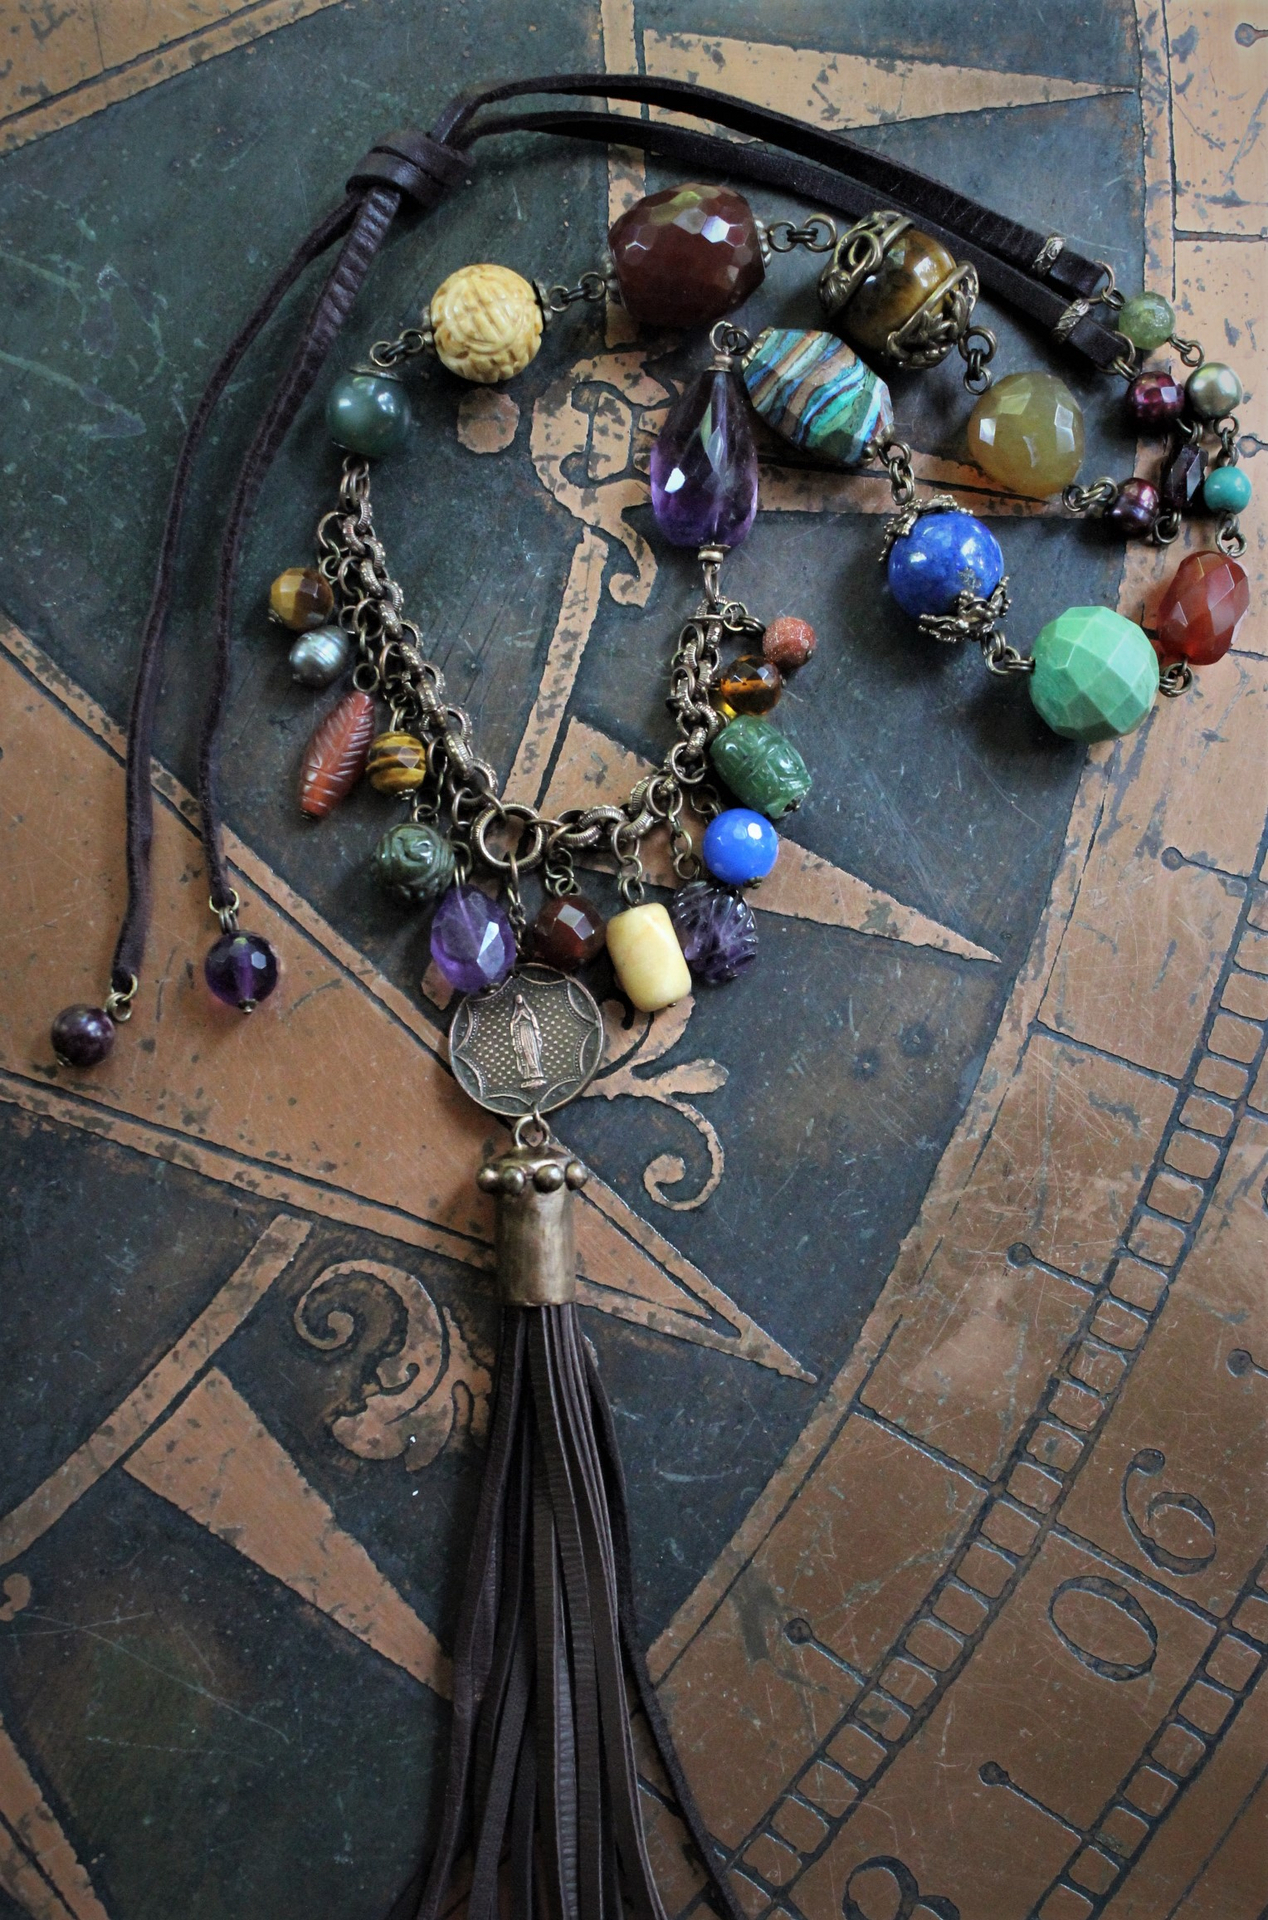 In the Whispers Necklace with Multi Faceted & Polished Gemstones, Antique French Our Lady of Lourdes Medal, Leather Tassel, Leather Ties